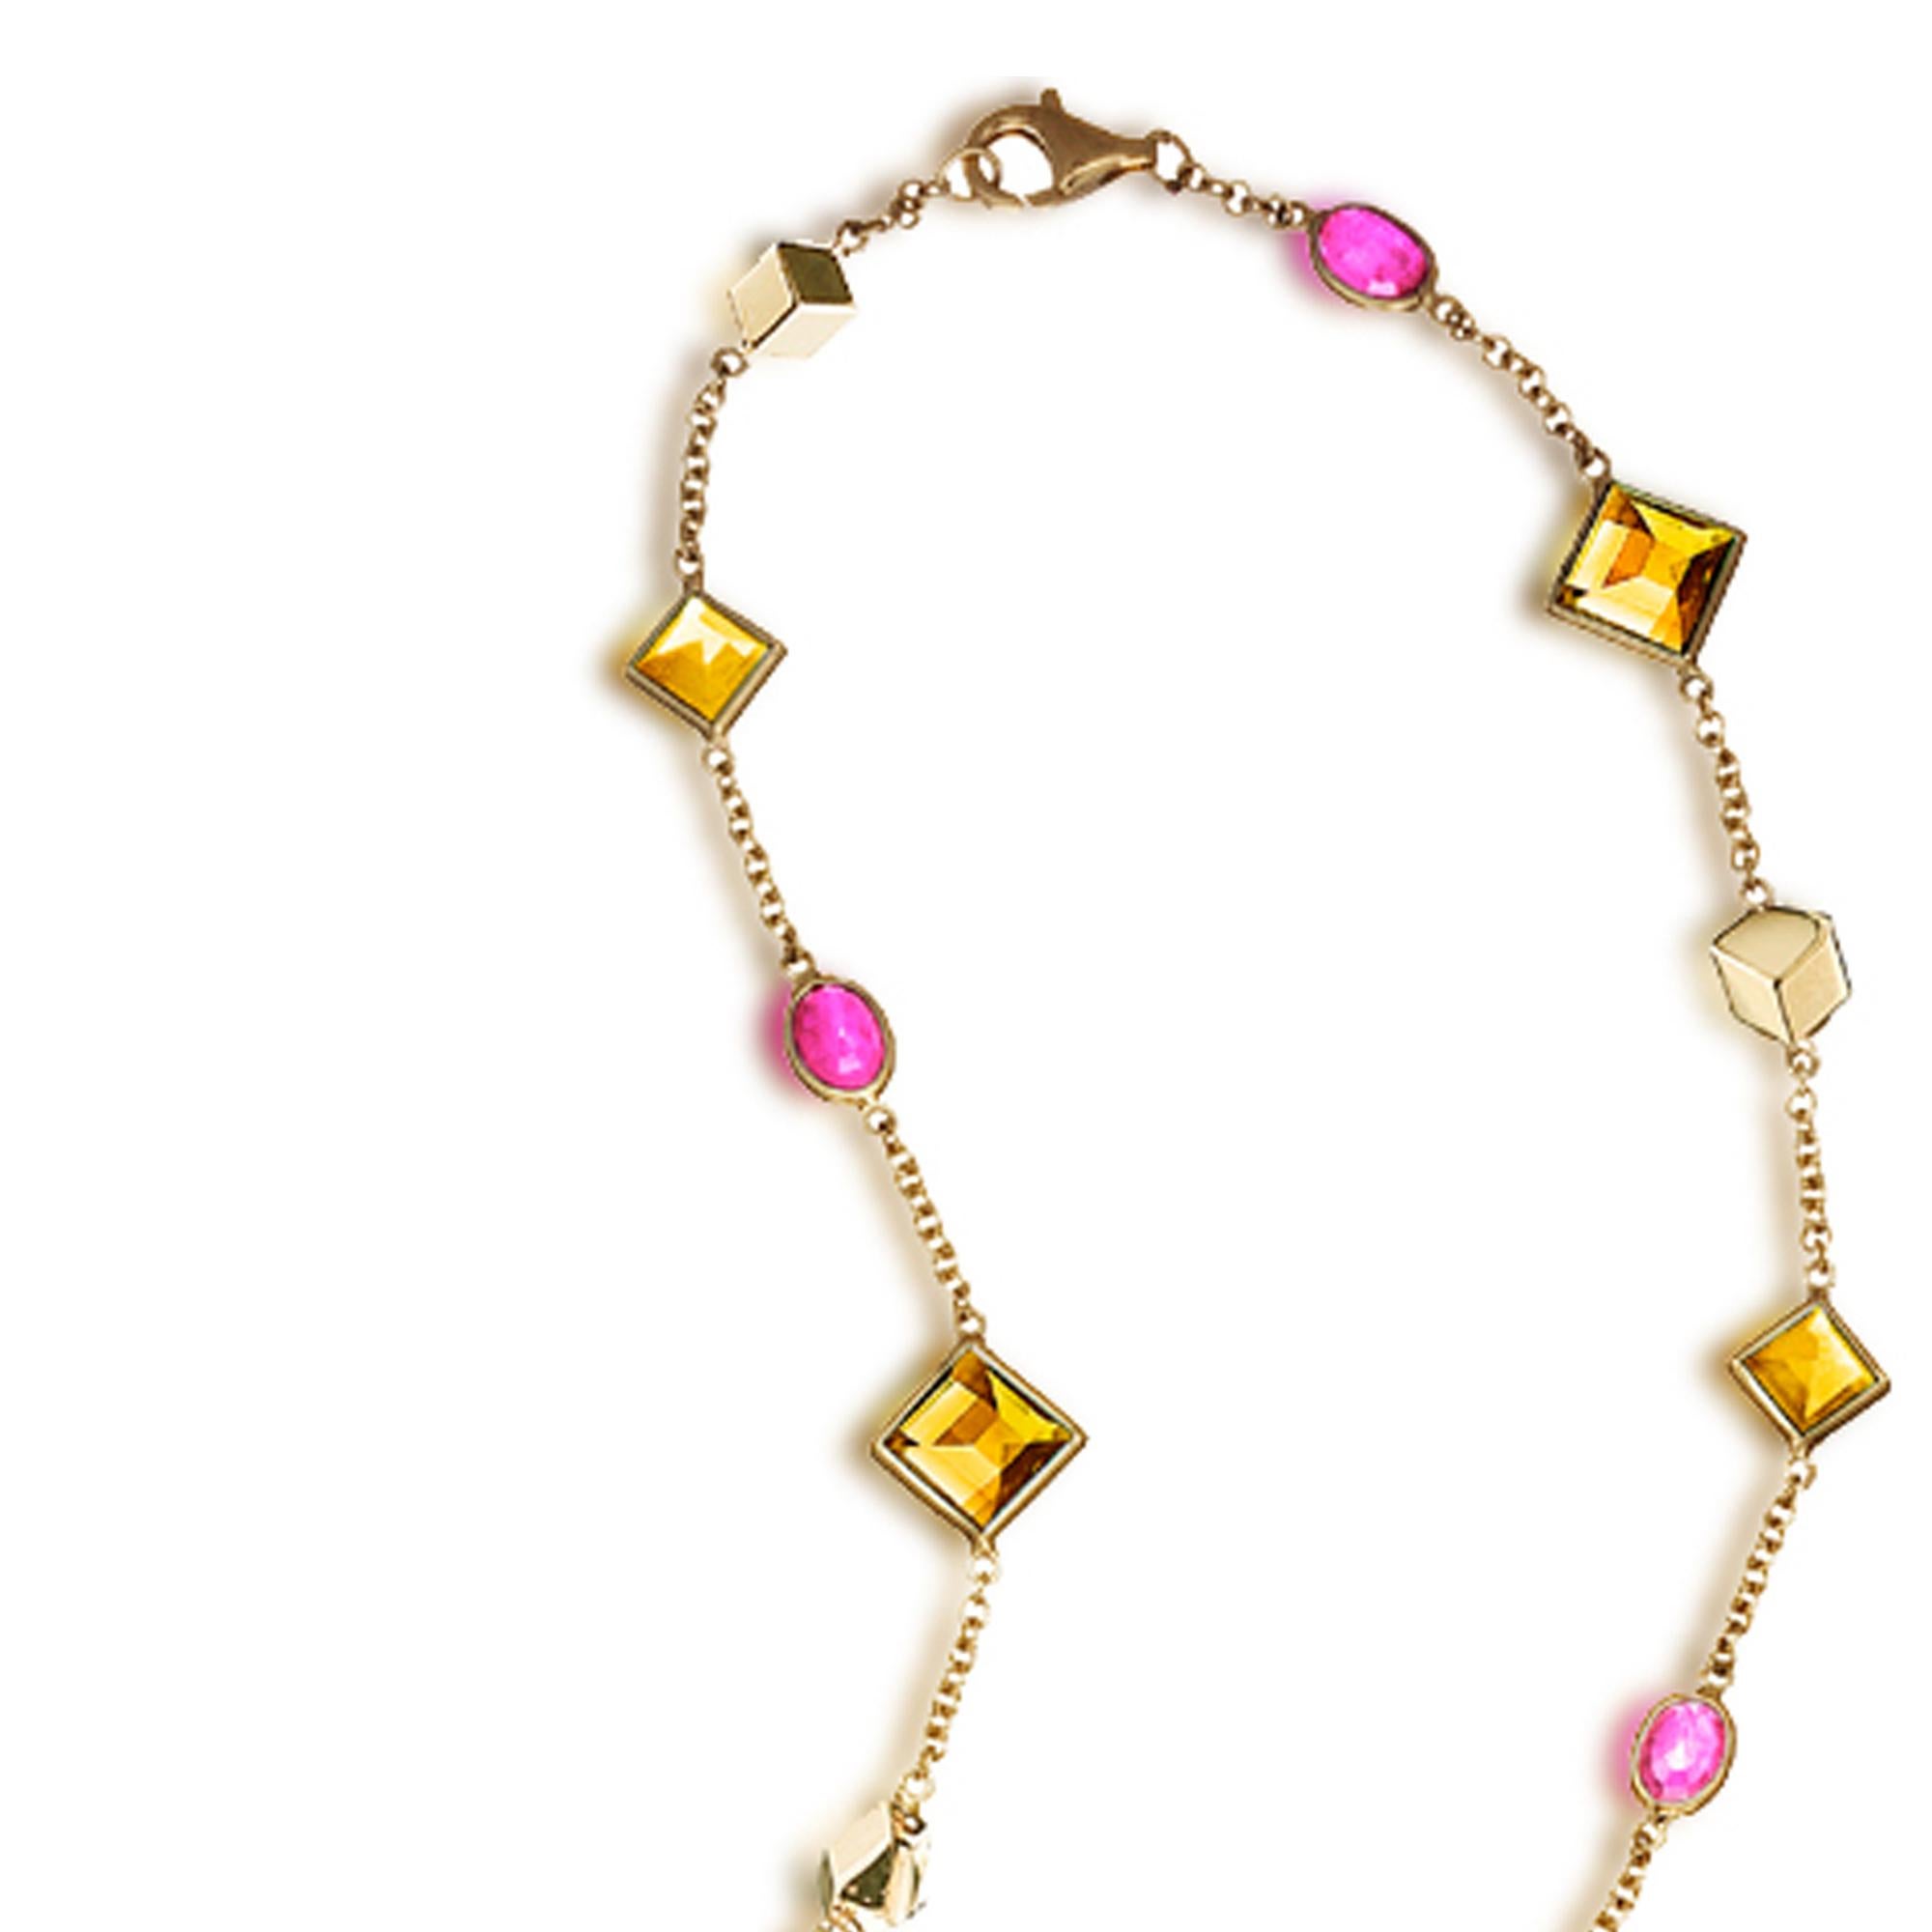 Paolo Costagli 18 Karat Yellow Gold Necklace with Citrine and Pink Sapphires (Smaragdschliff) im Angebot